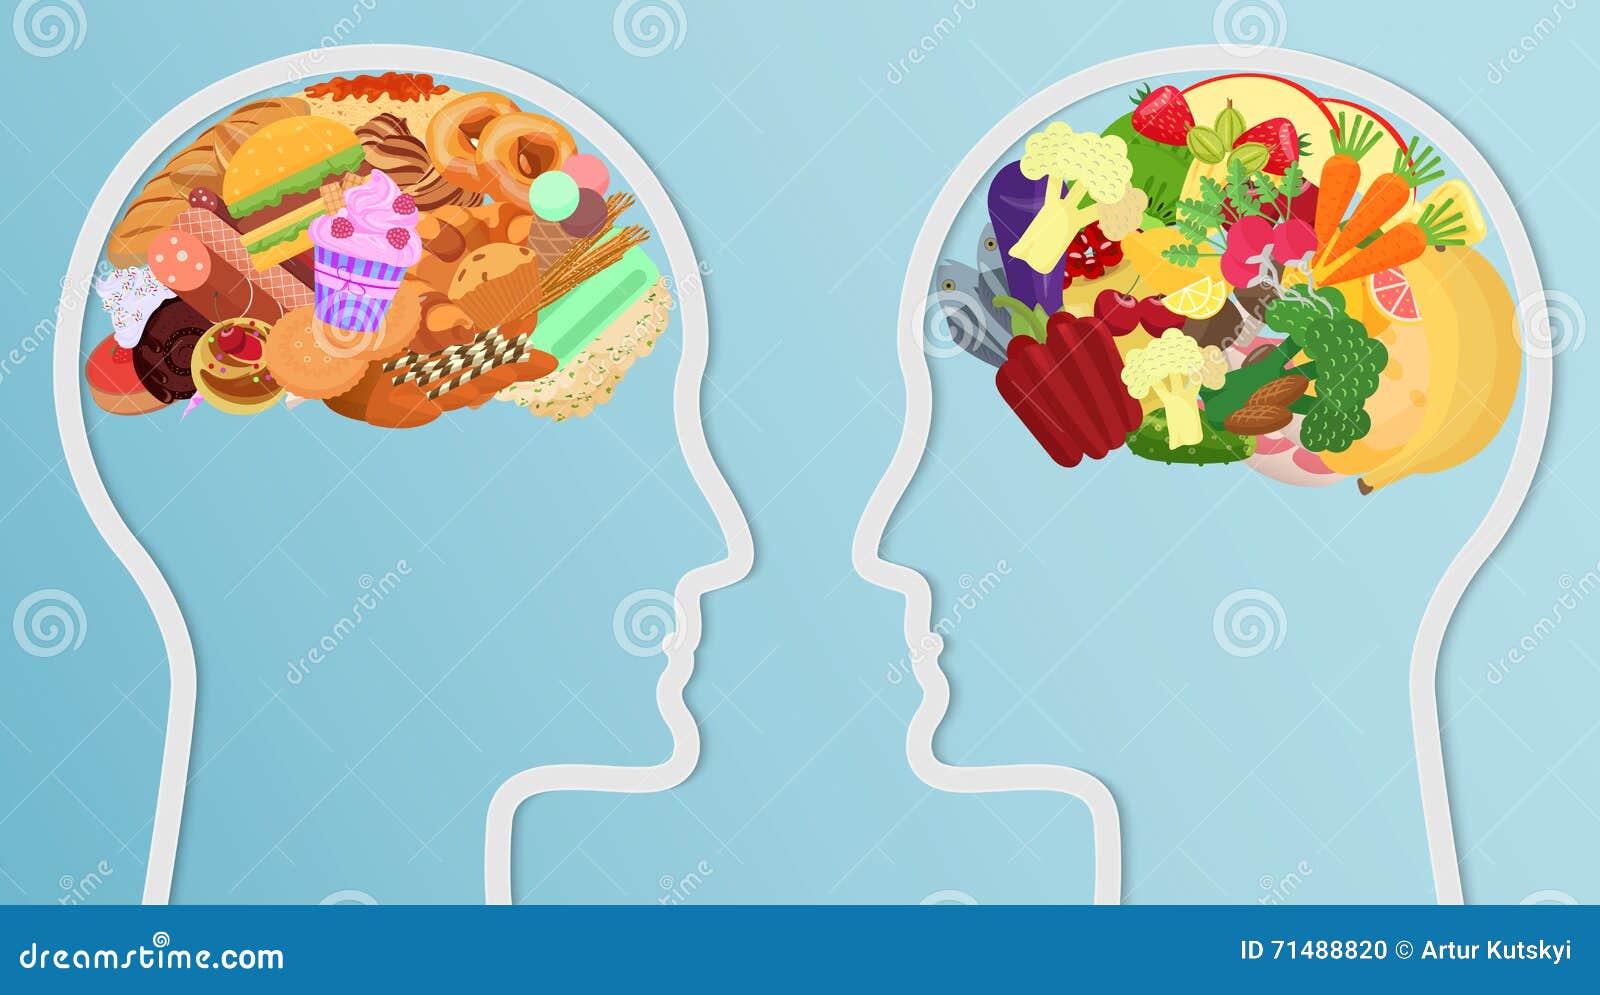 health and unhealth food eat in brain. human head silhouette diet choice healthy lifestyle concept.